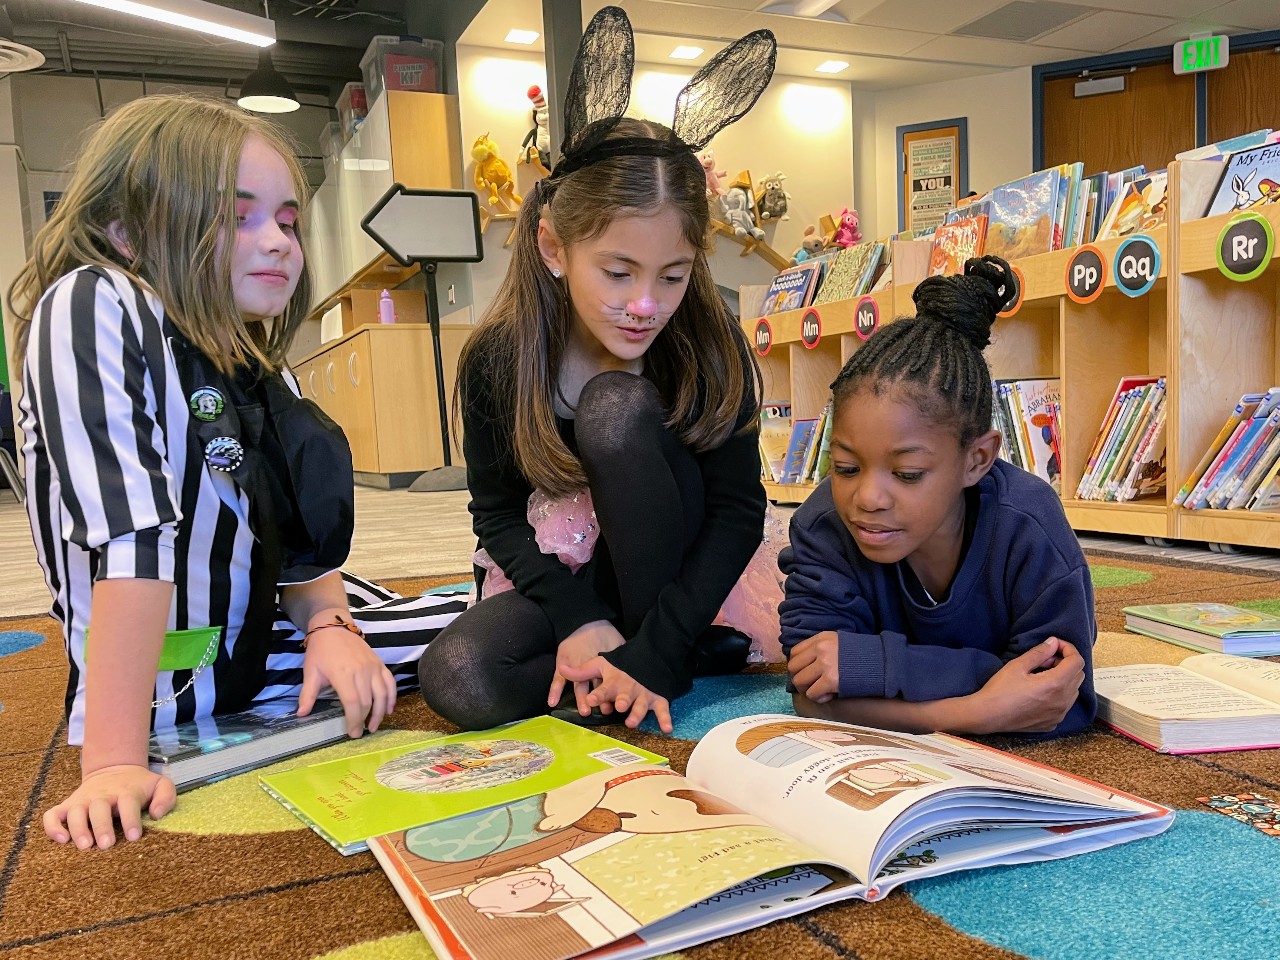 Three HPES students study the same book in the library.